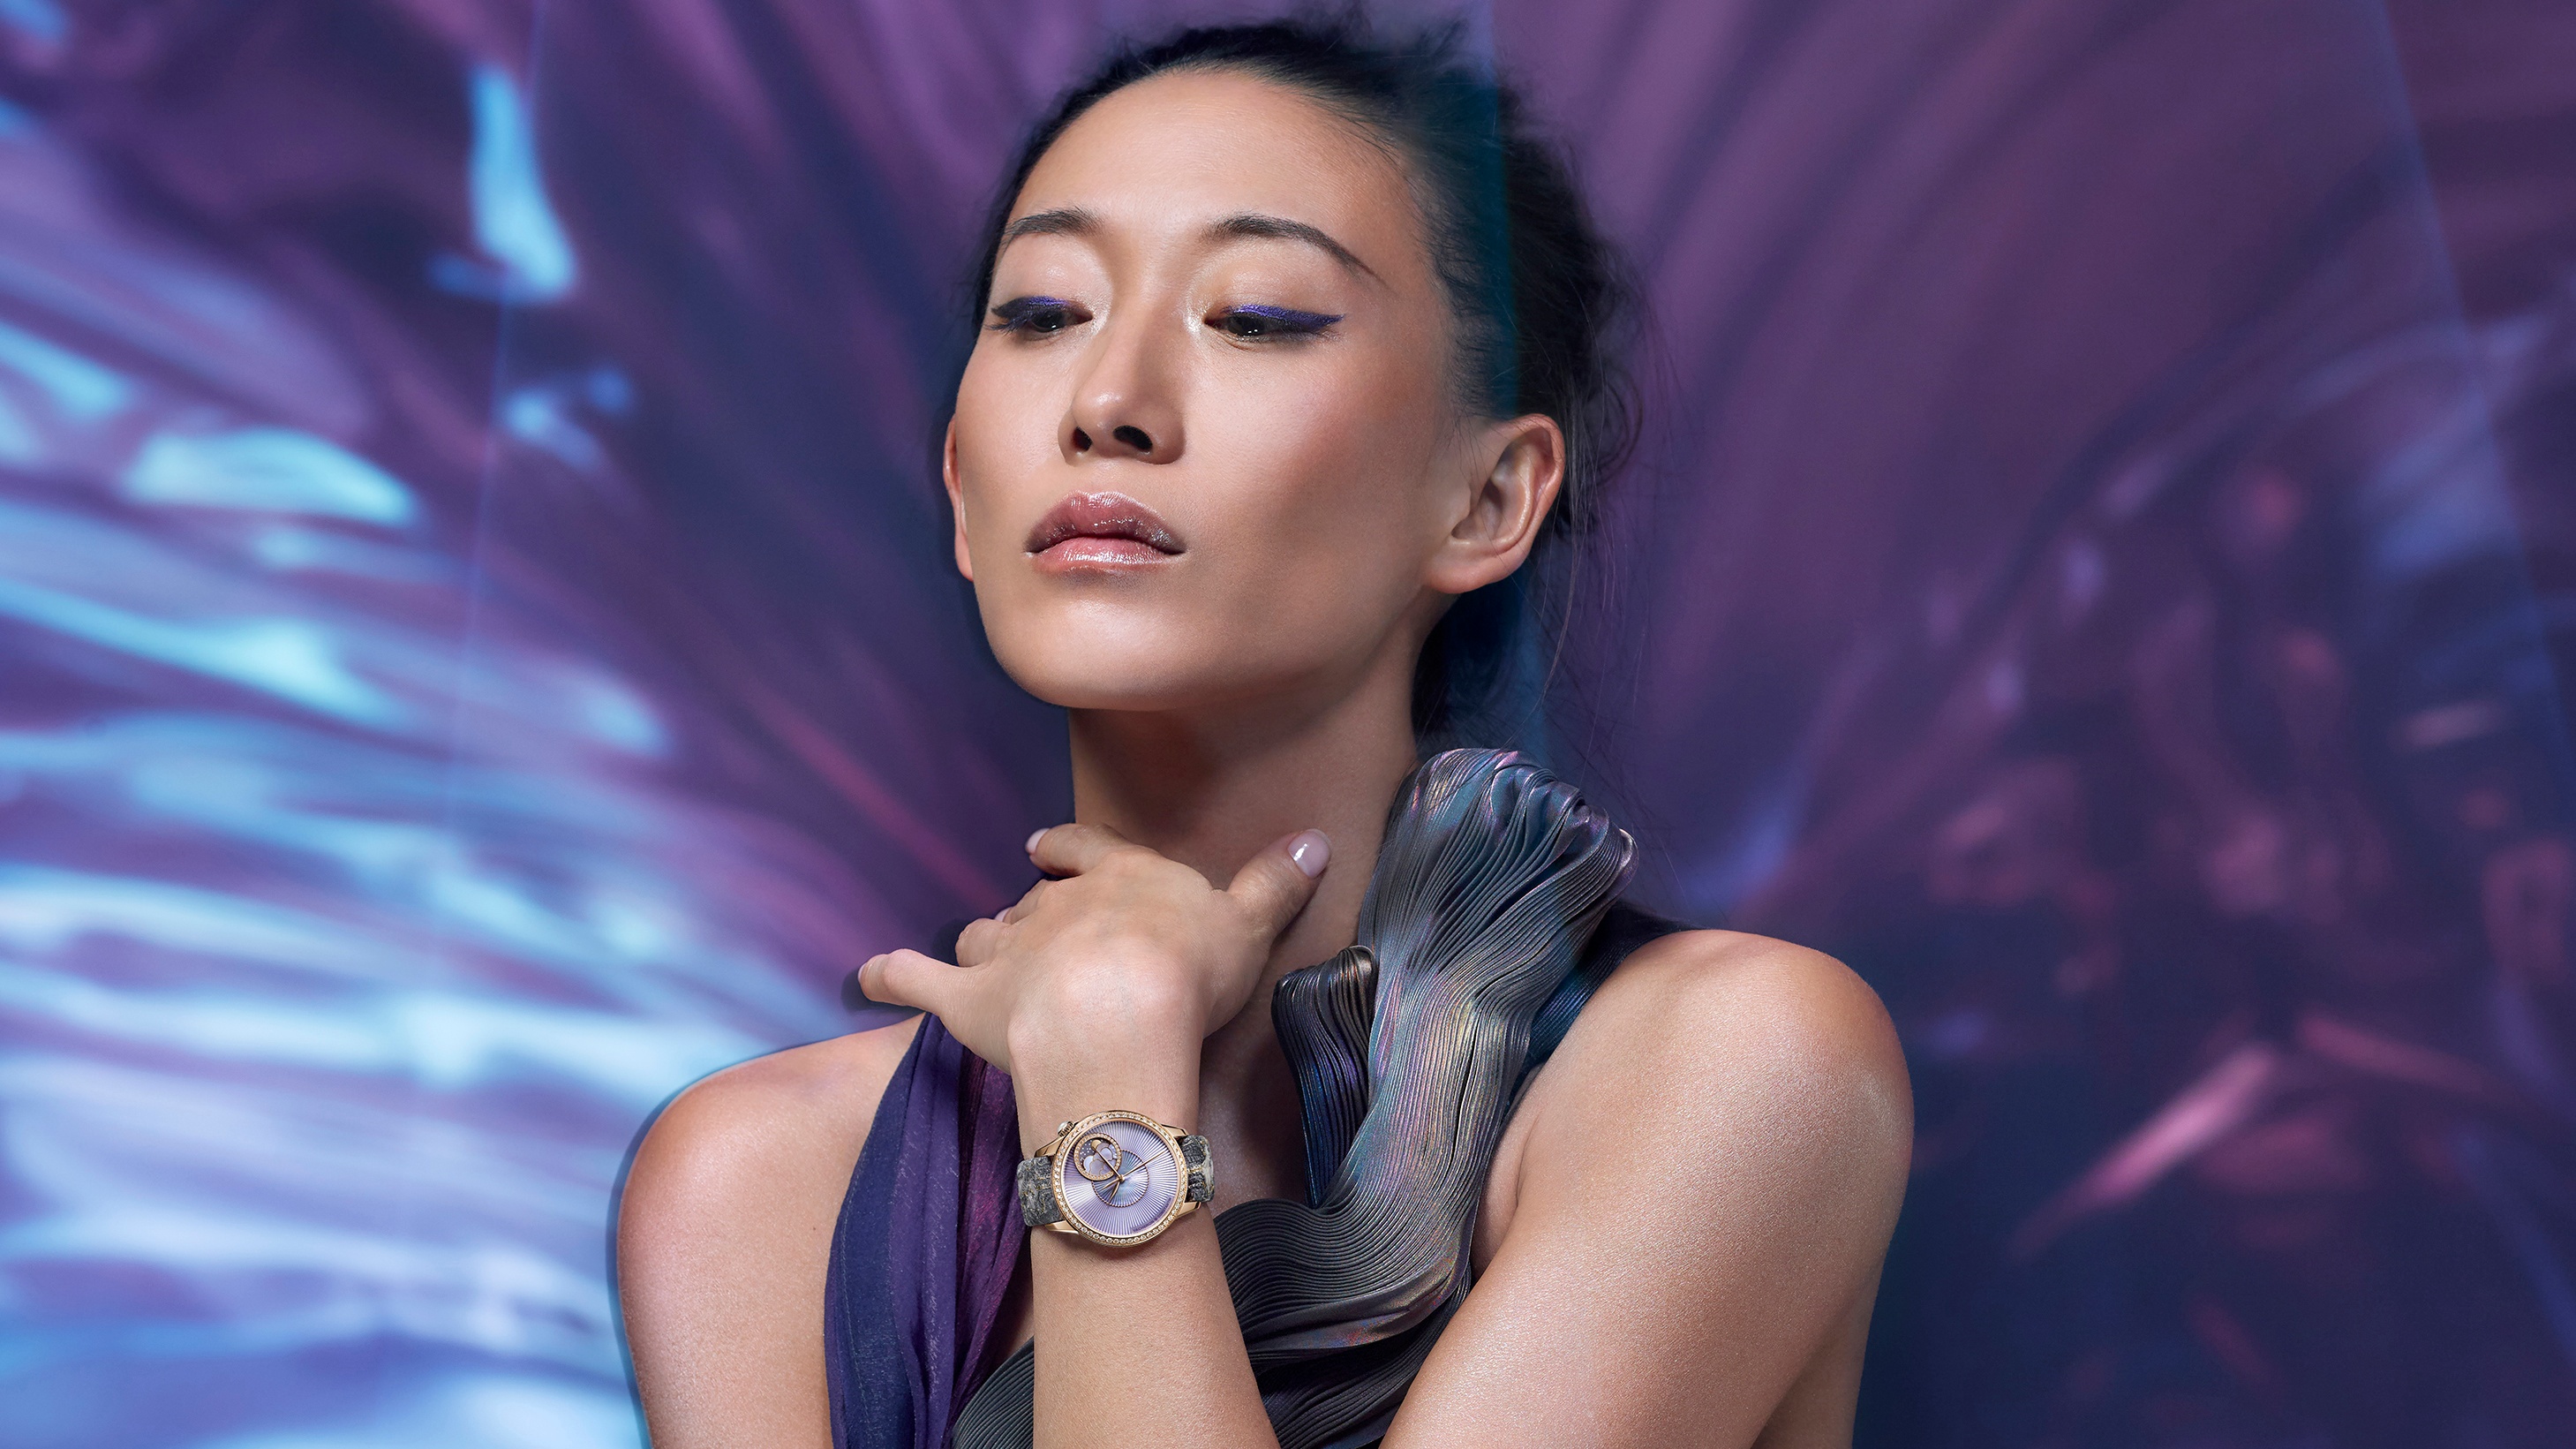 The Égérie concept watch stems from an artistic collaboration between Vacheron Constantin and Yiqing Yin. Image: Vacheron Constantin